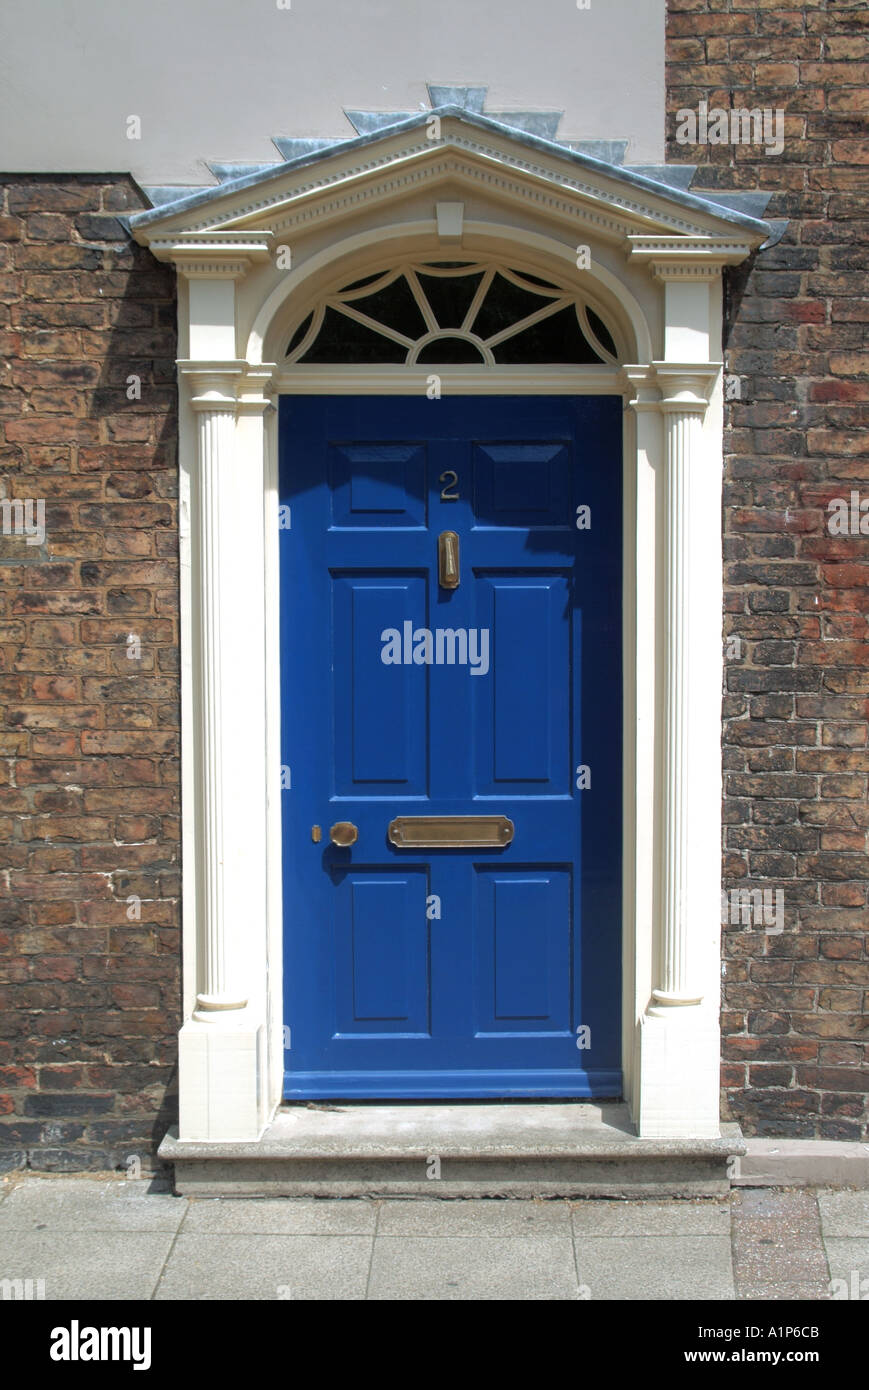 Blue residential front door with white surround opening directly onto pavement Stock Photo